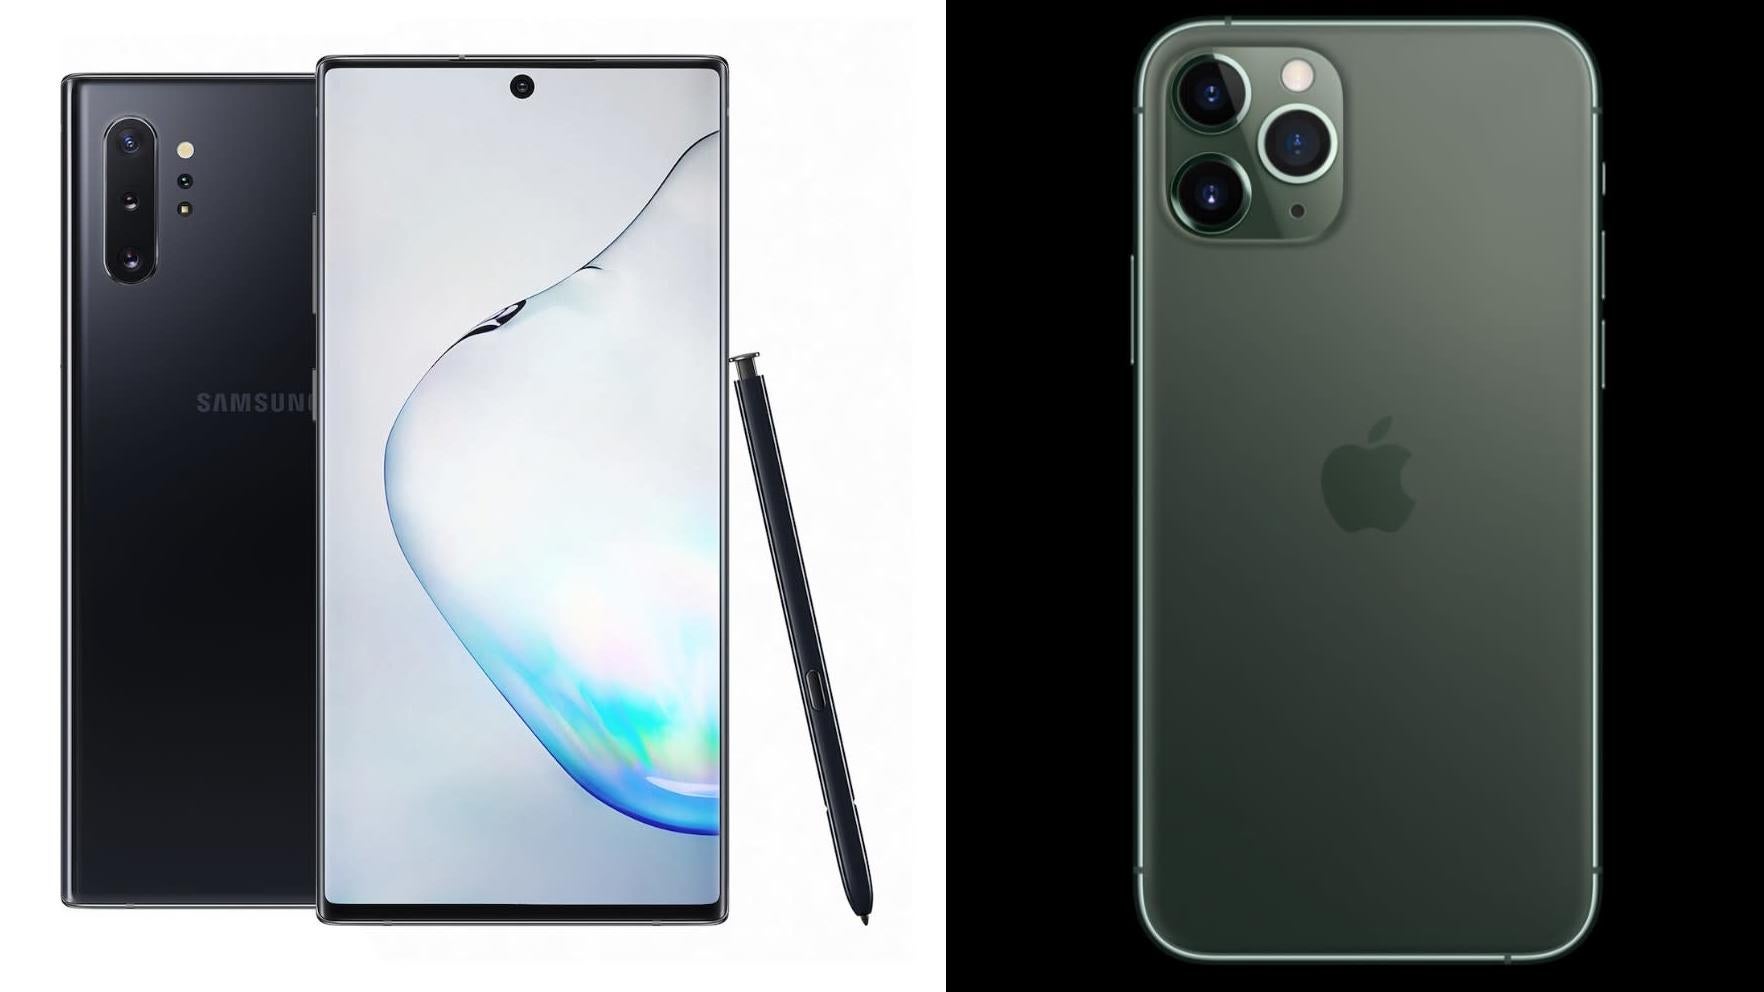 Should You Buy Apple’s IPhone 11 Pro Or Samsung’s Galaxy Note 10?